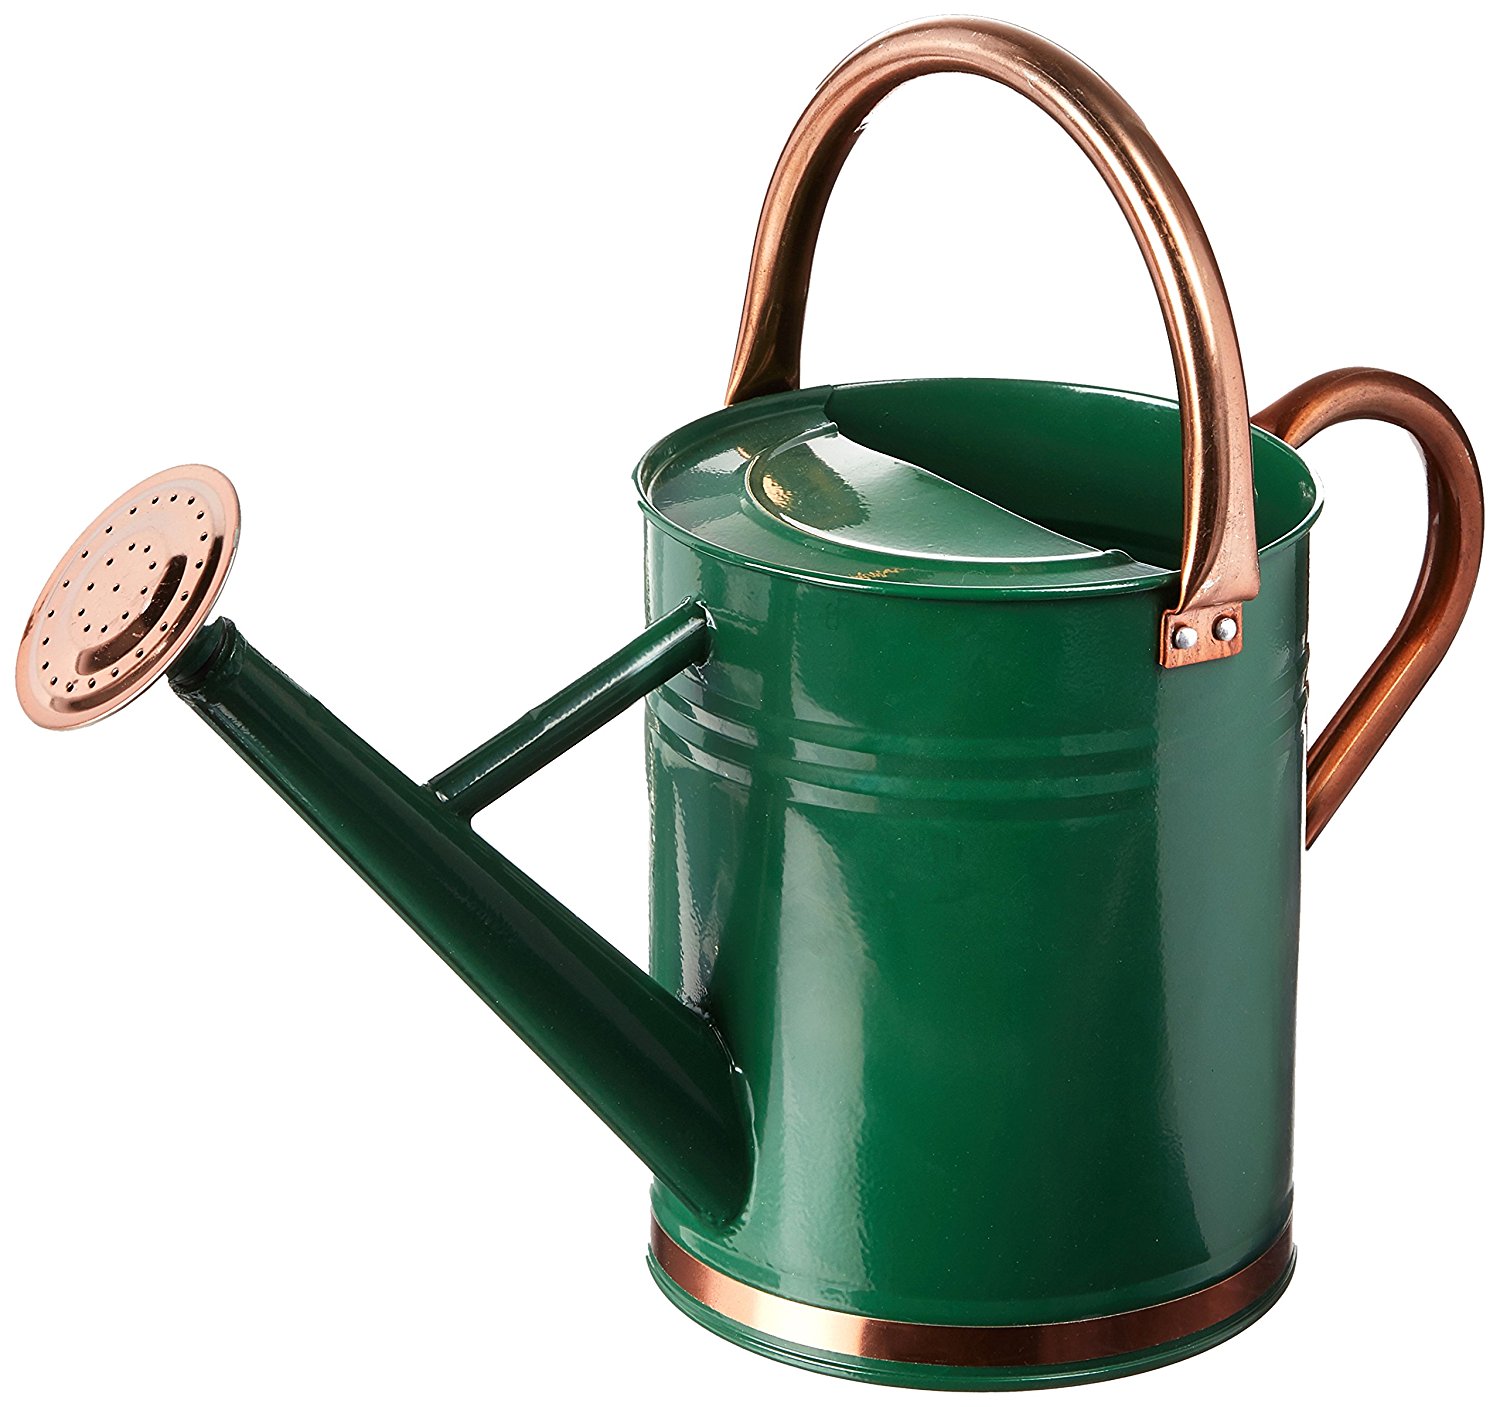 Watering Can Black Friday Deals